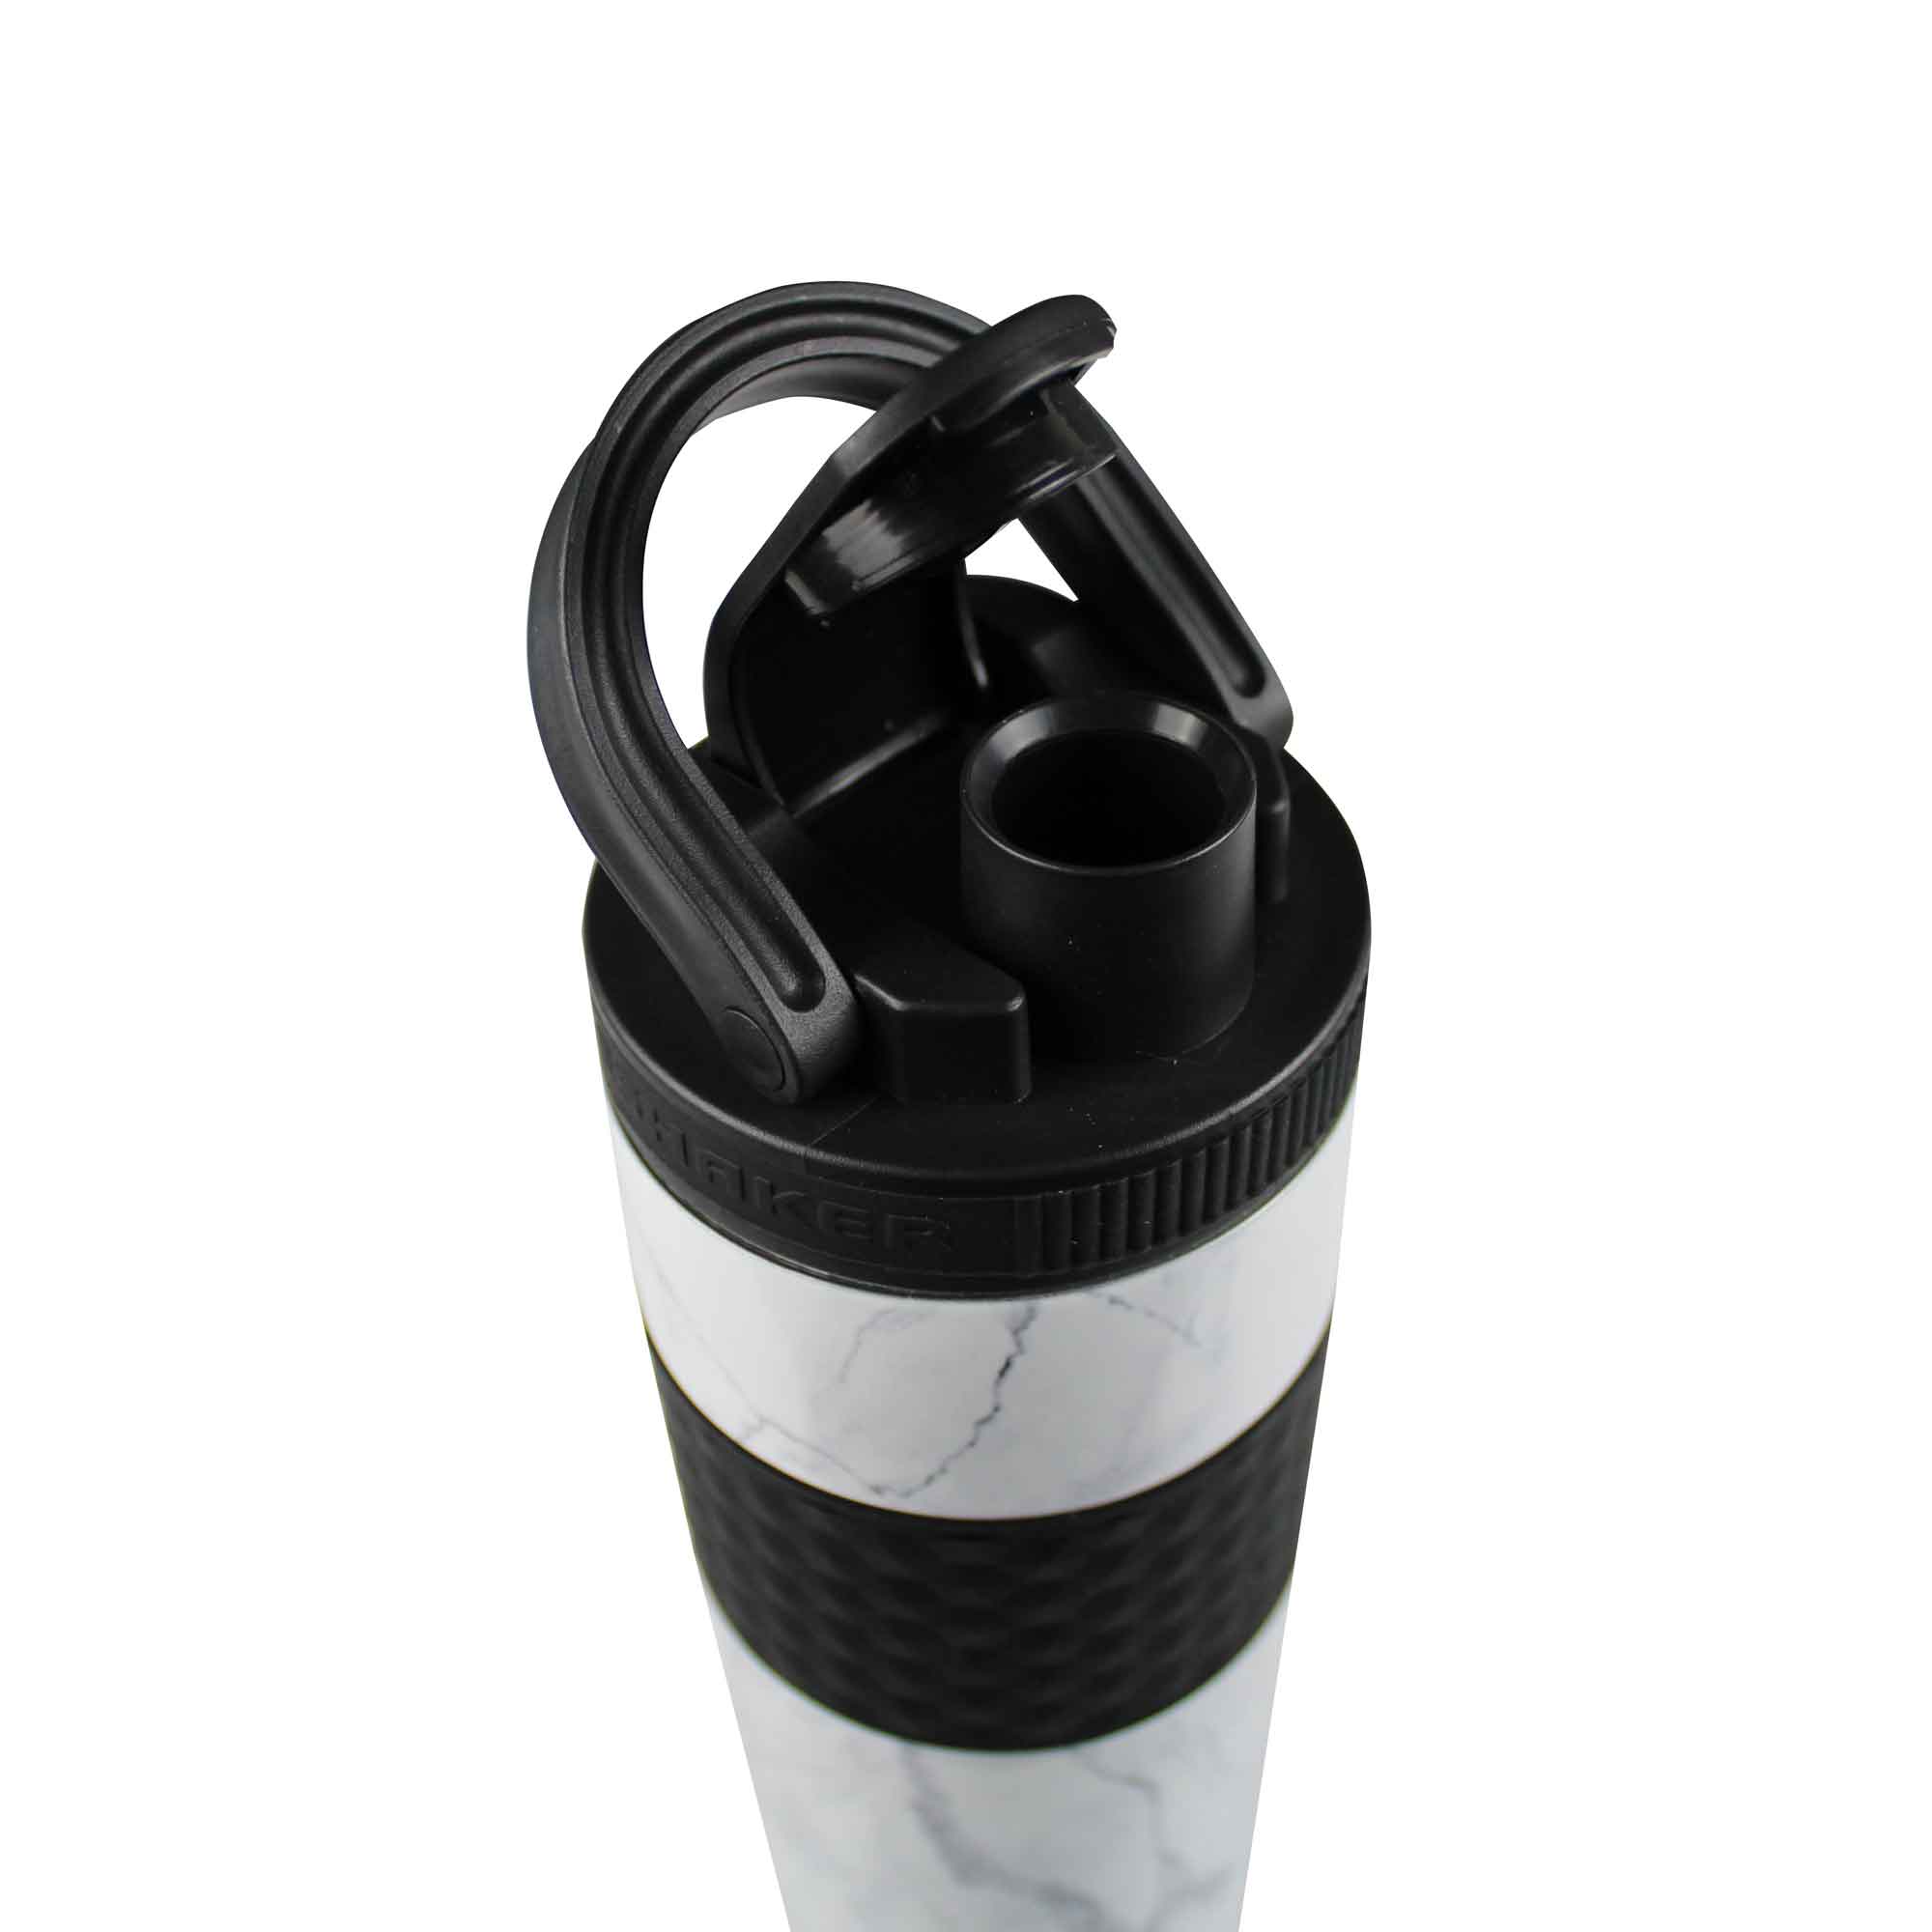 [2 Pack] 20-oz Shaker Bottle with Attachable Storage Compartments (White &  Black - 2 Pack) | 20 Ounc…See more [2 Pack] 20-oz Shaker Bottle with